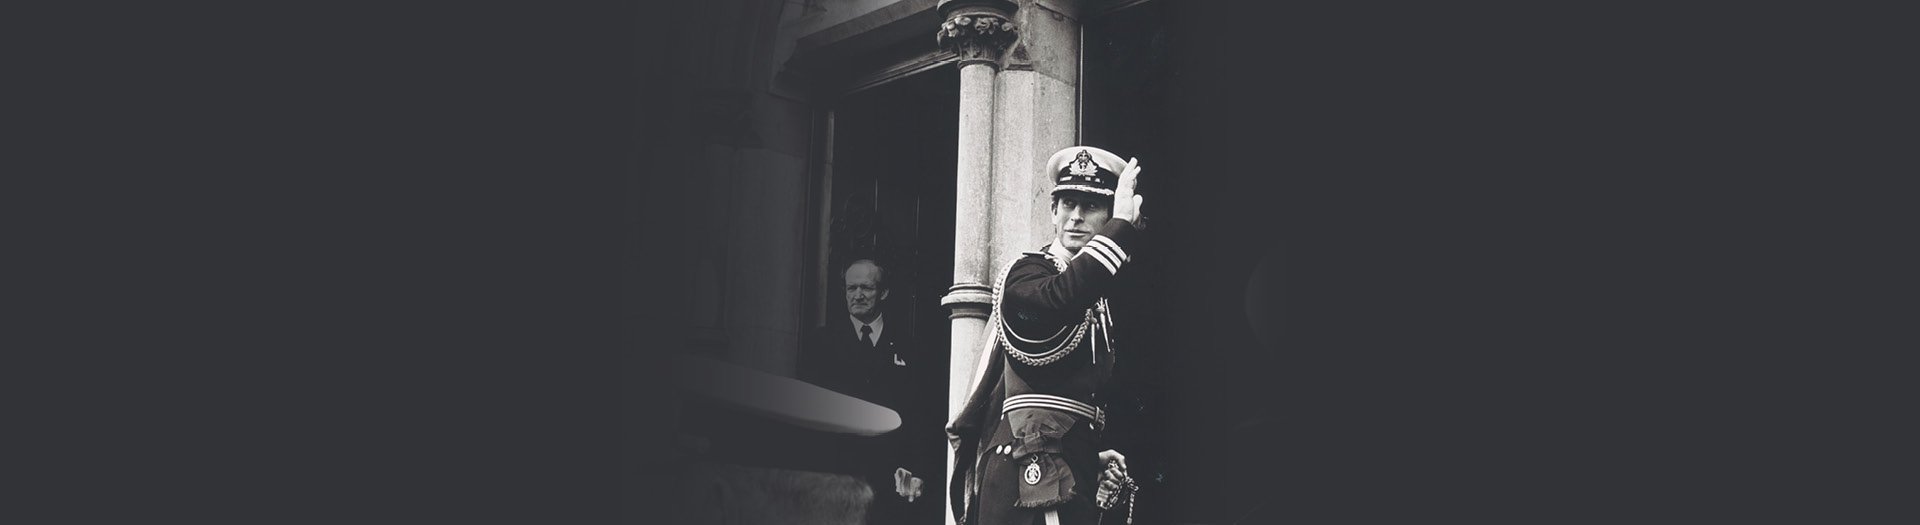 A black banner with a black and white image of a man in uniform waving in front of a house.